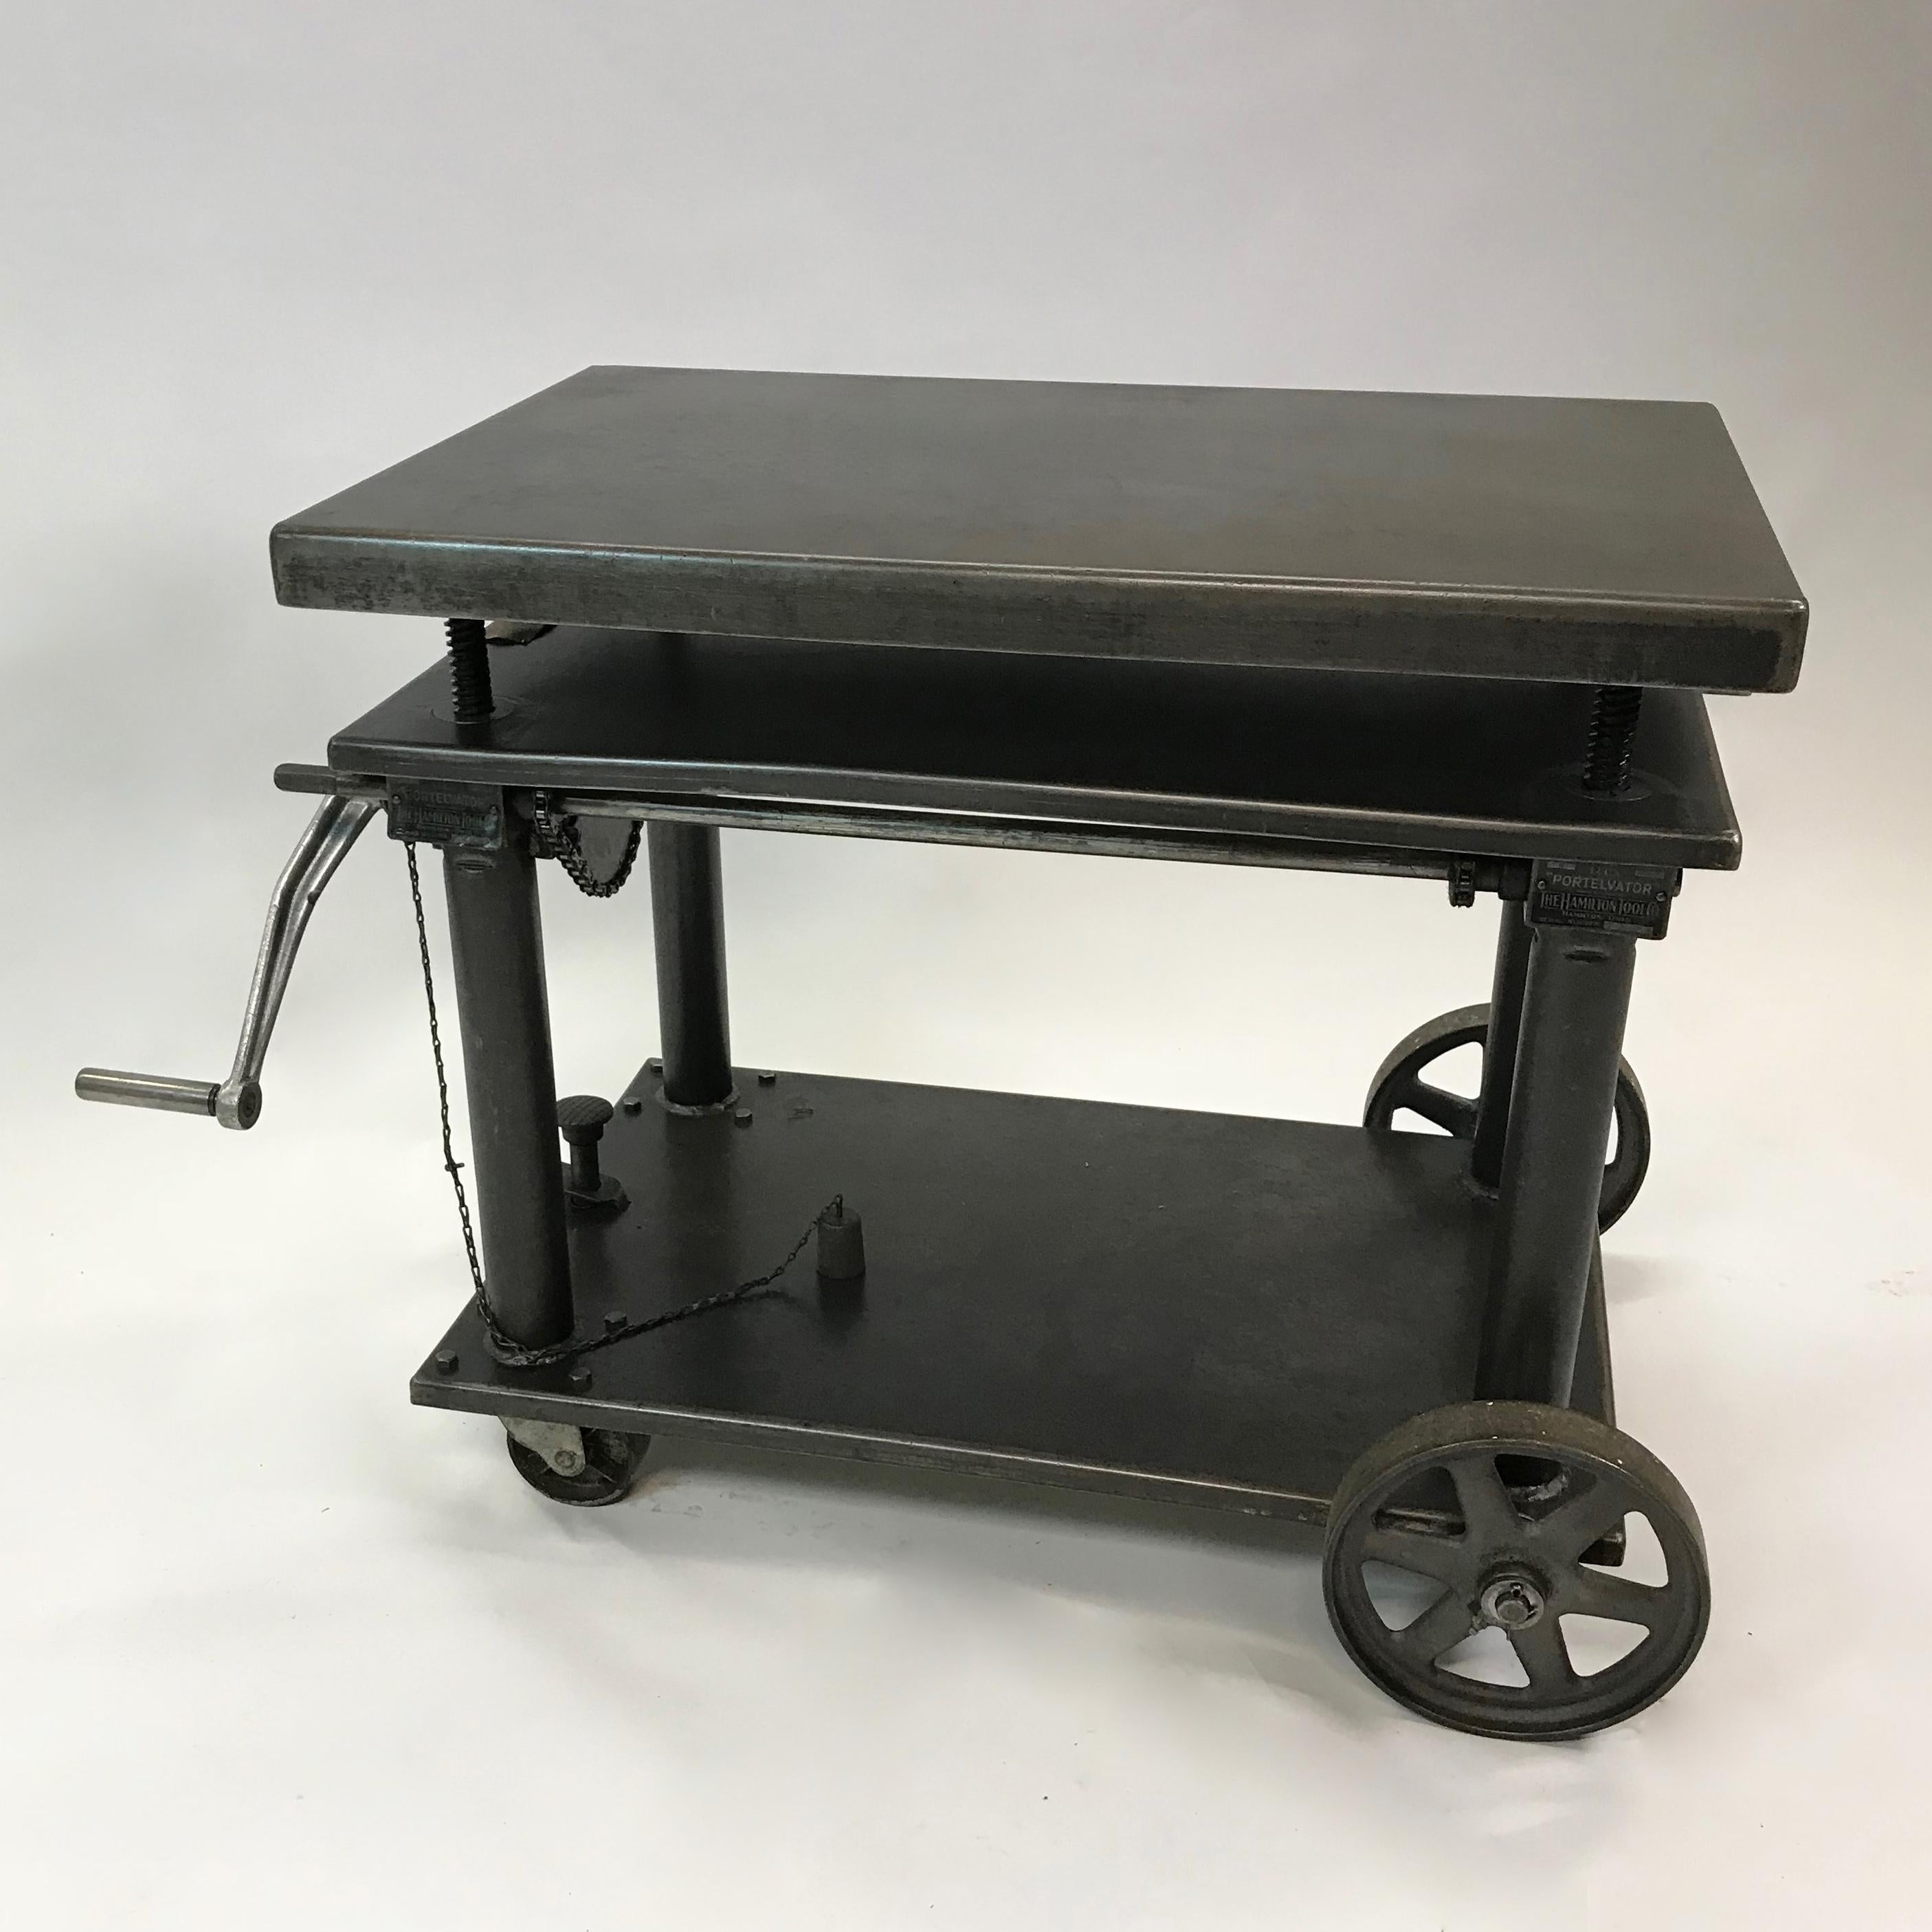 American Industrial, fully functional, iron and steel, heavily reinforced, hand-crank, mobile factory cart or die table manufactured by Hamilton Tool Co., Hamilton, Oh. is height is adjustable from 25 - 39 inches. This portable elevating table or